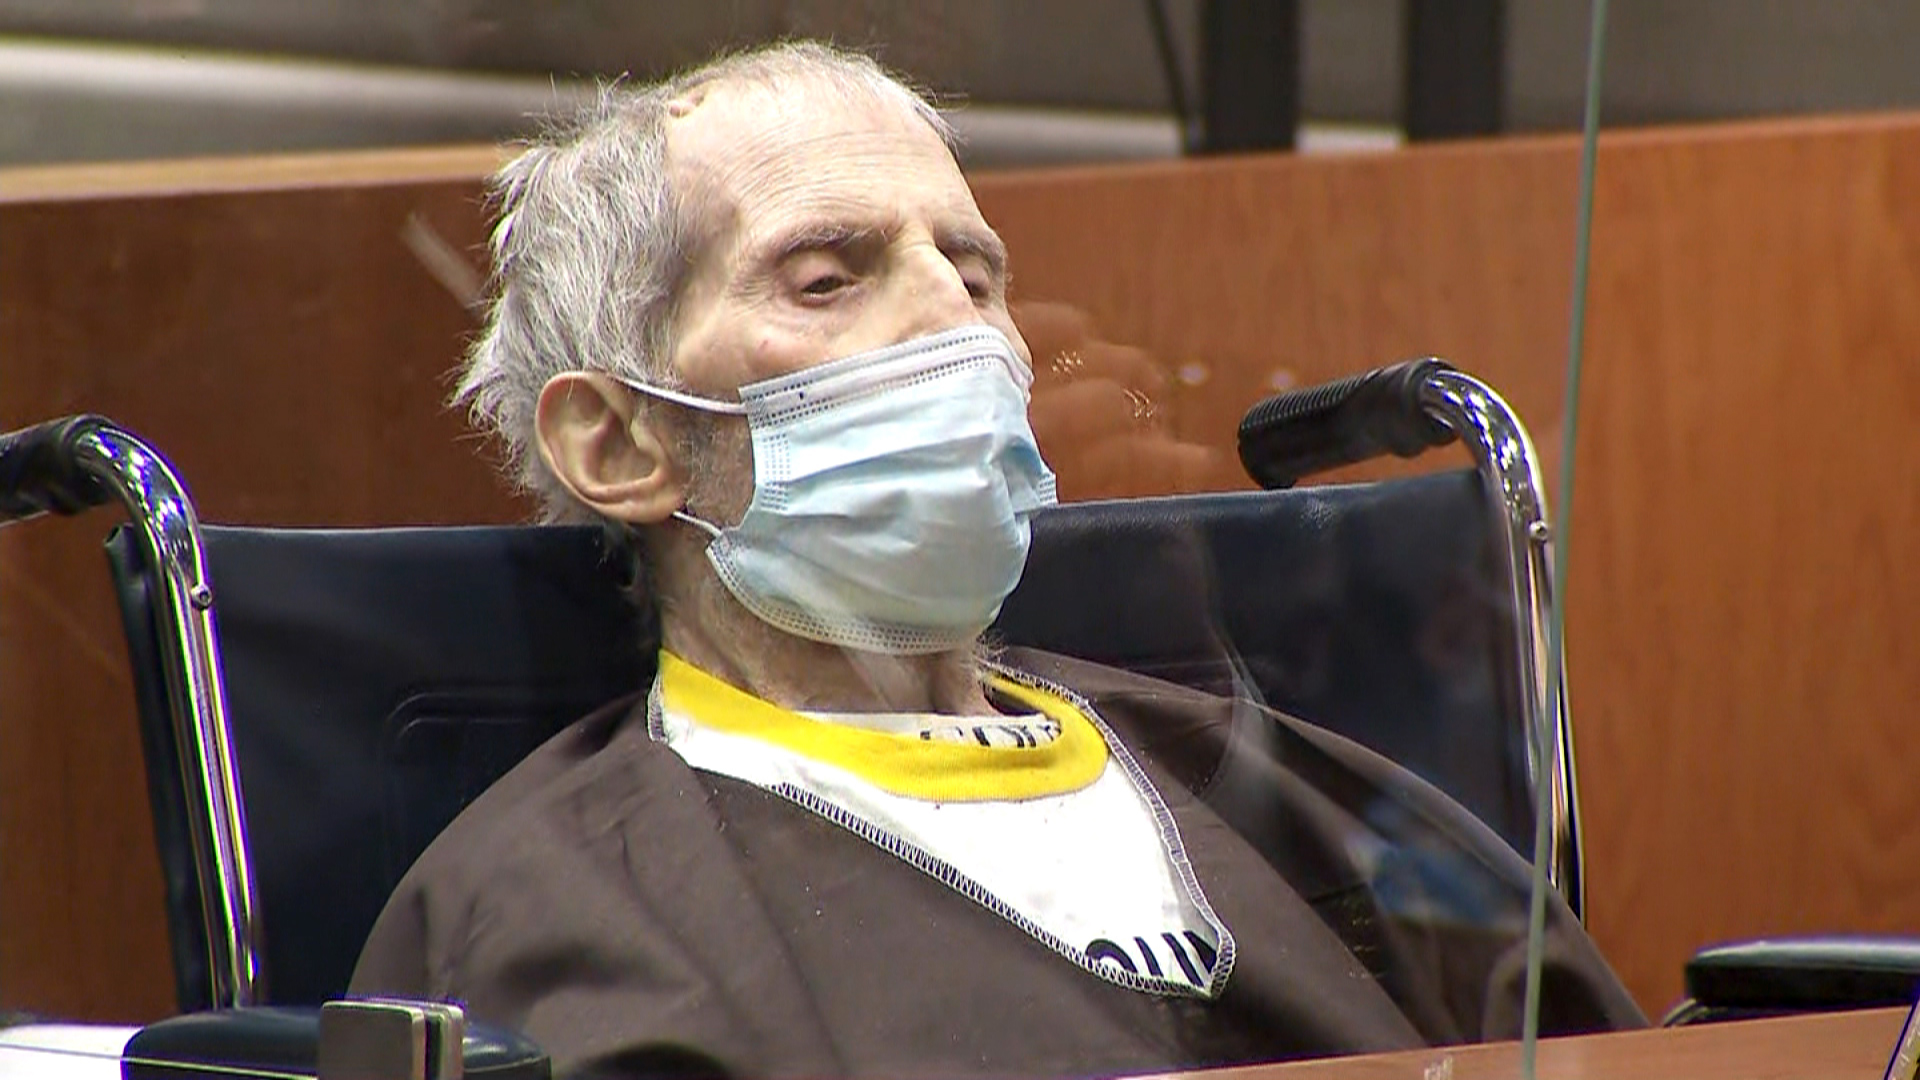 Robert Durst appears in court for his sentencing on Thursday, October 14. 